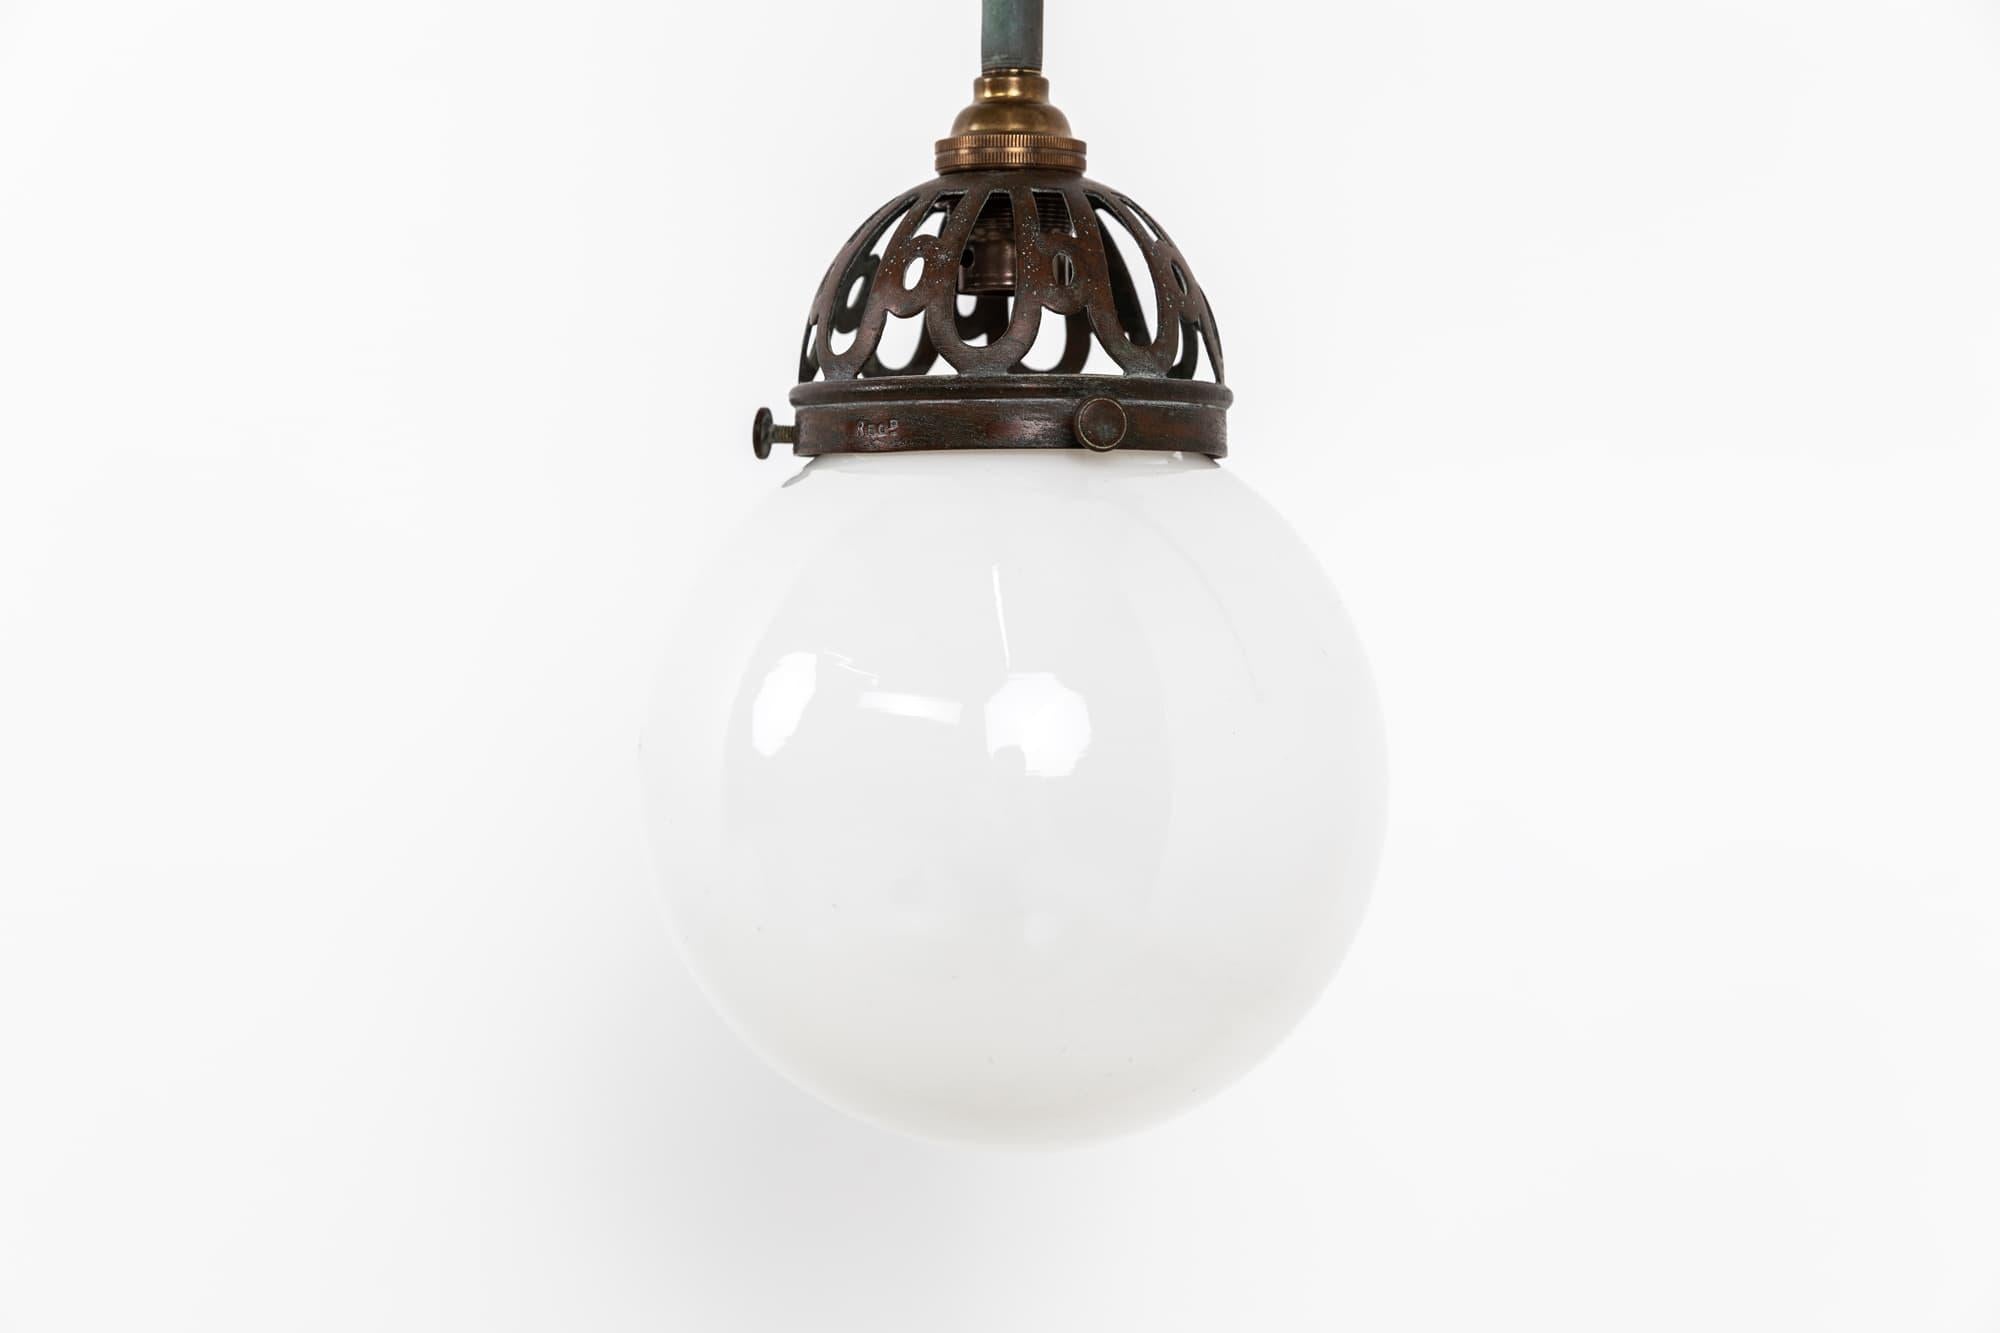 

An elegant former gas wall lamp with opaline shade. c.1920

Brass construction with pierced GEC gallery and diminutive globe opaline glass shade. 

This lamp could be wired to a plug or direct to mains, depending on preference.
